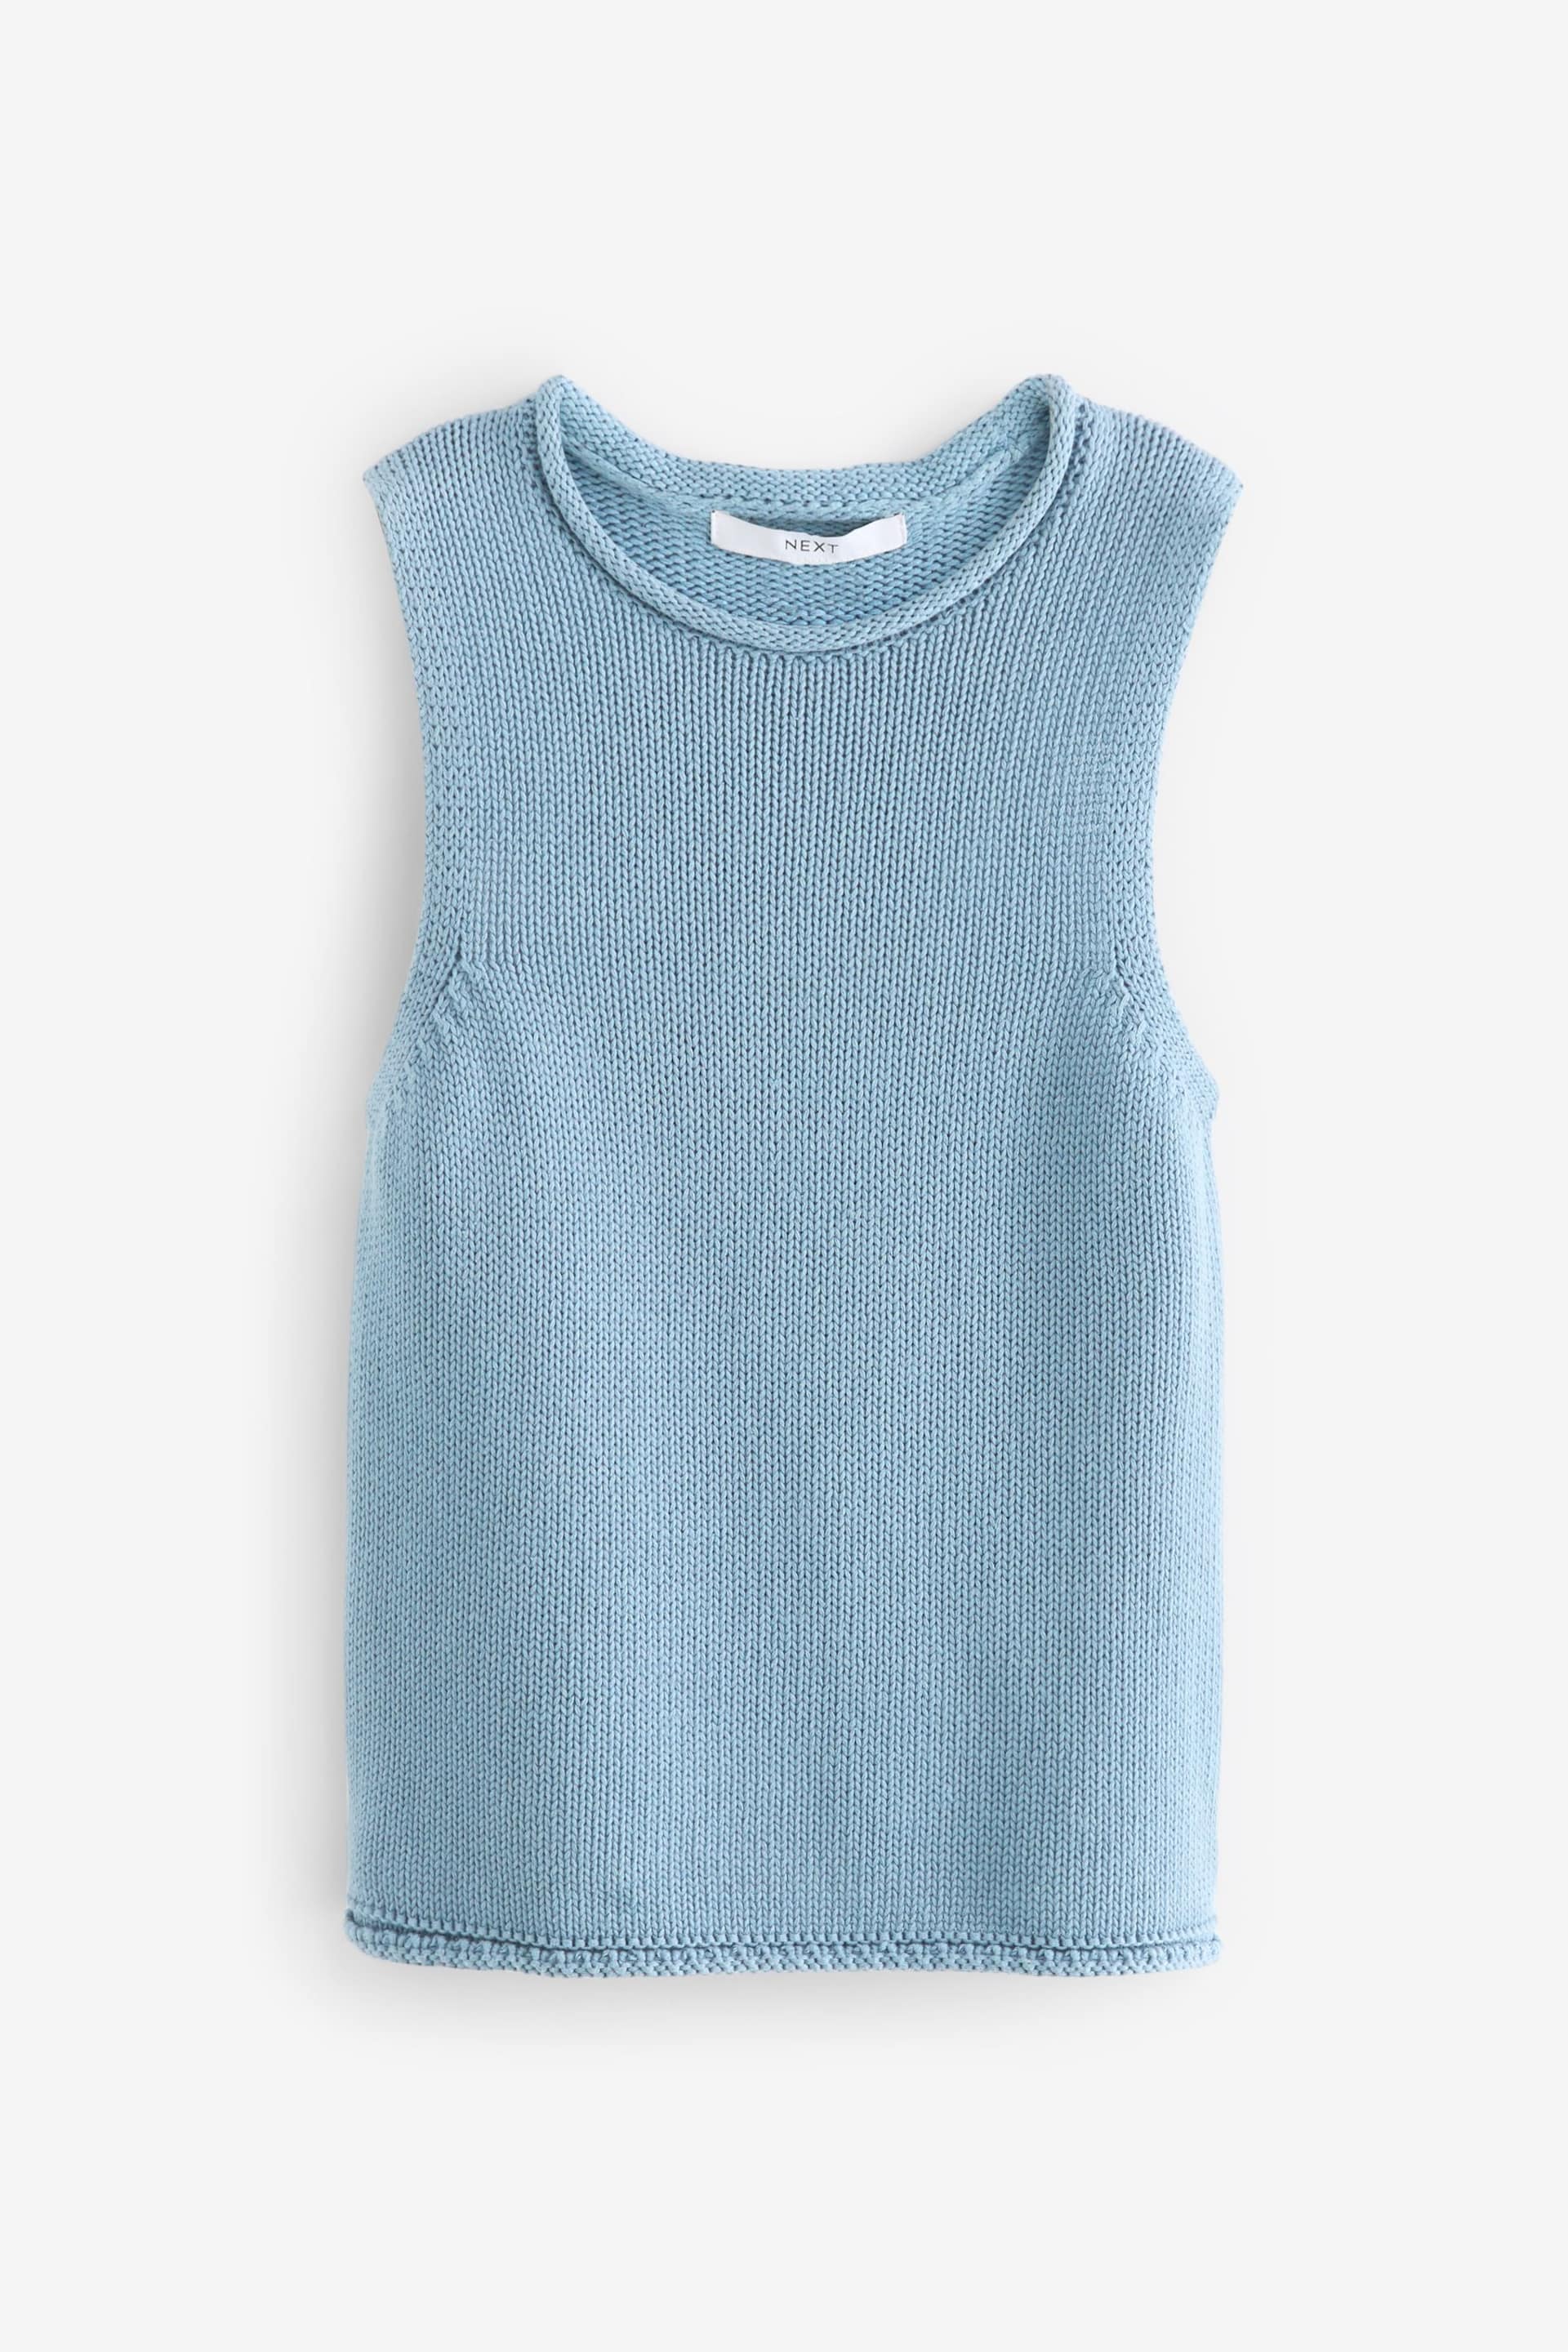 Chambray Blue Roll Edge Tank - Image 5 of 6